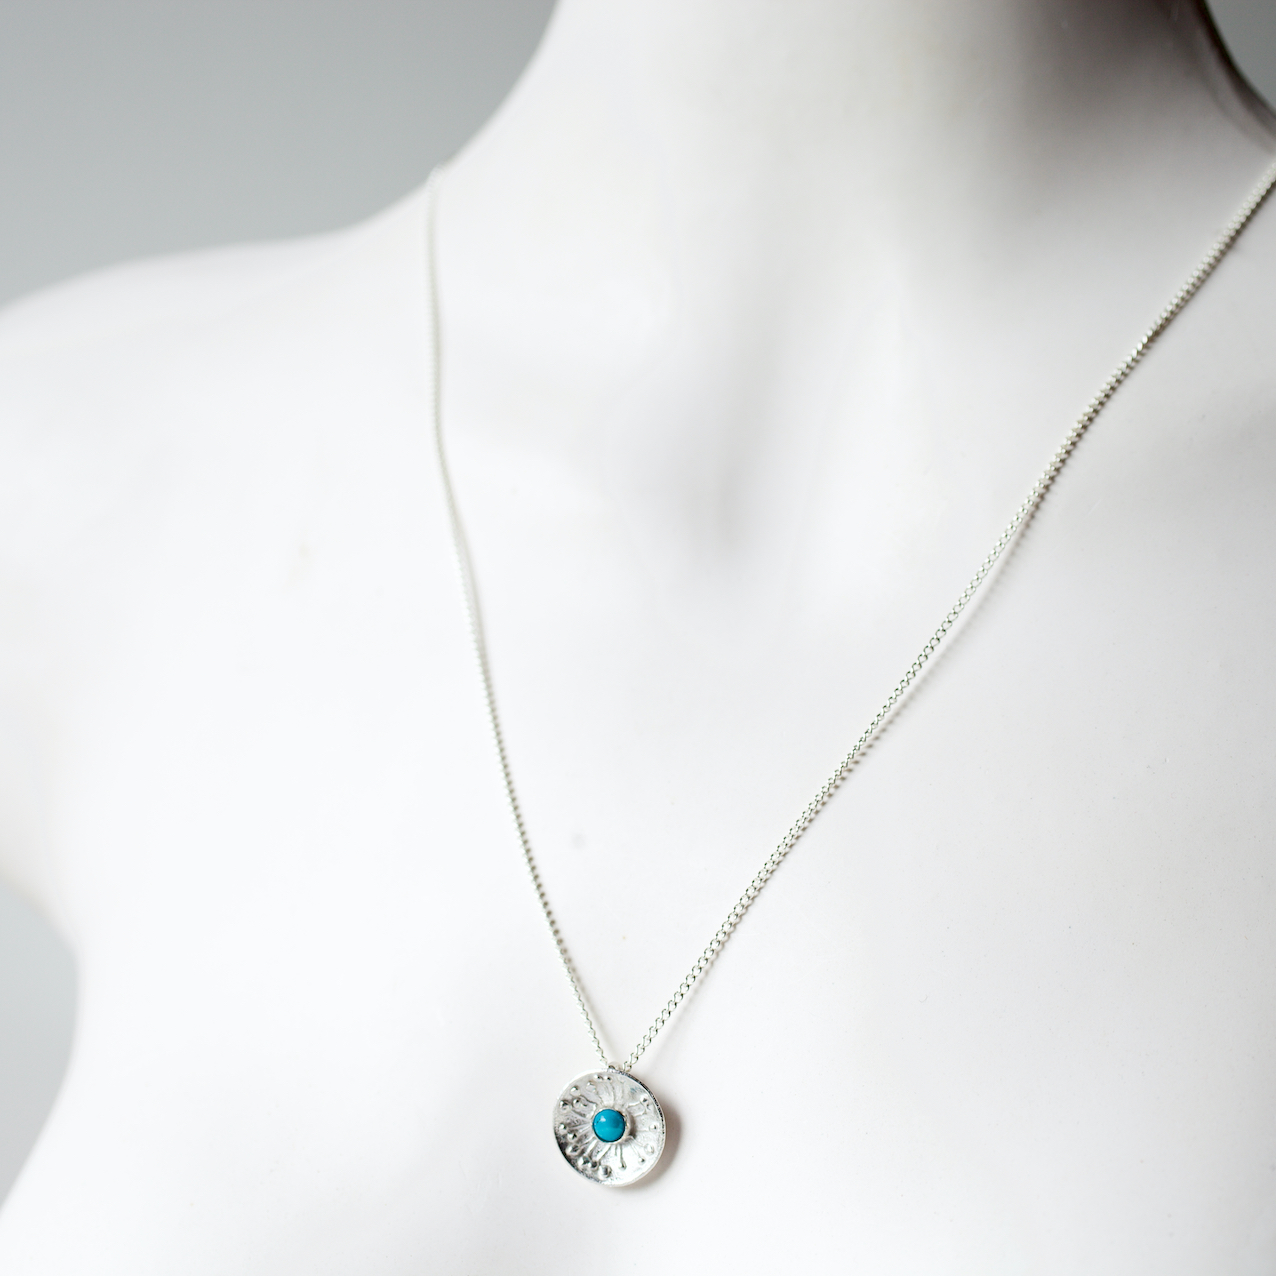 turquoise hawthorn blossom pendant 18mm diameter on 18" silver chain